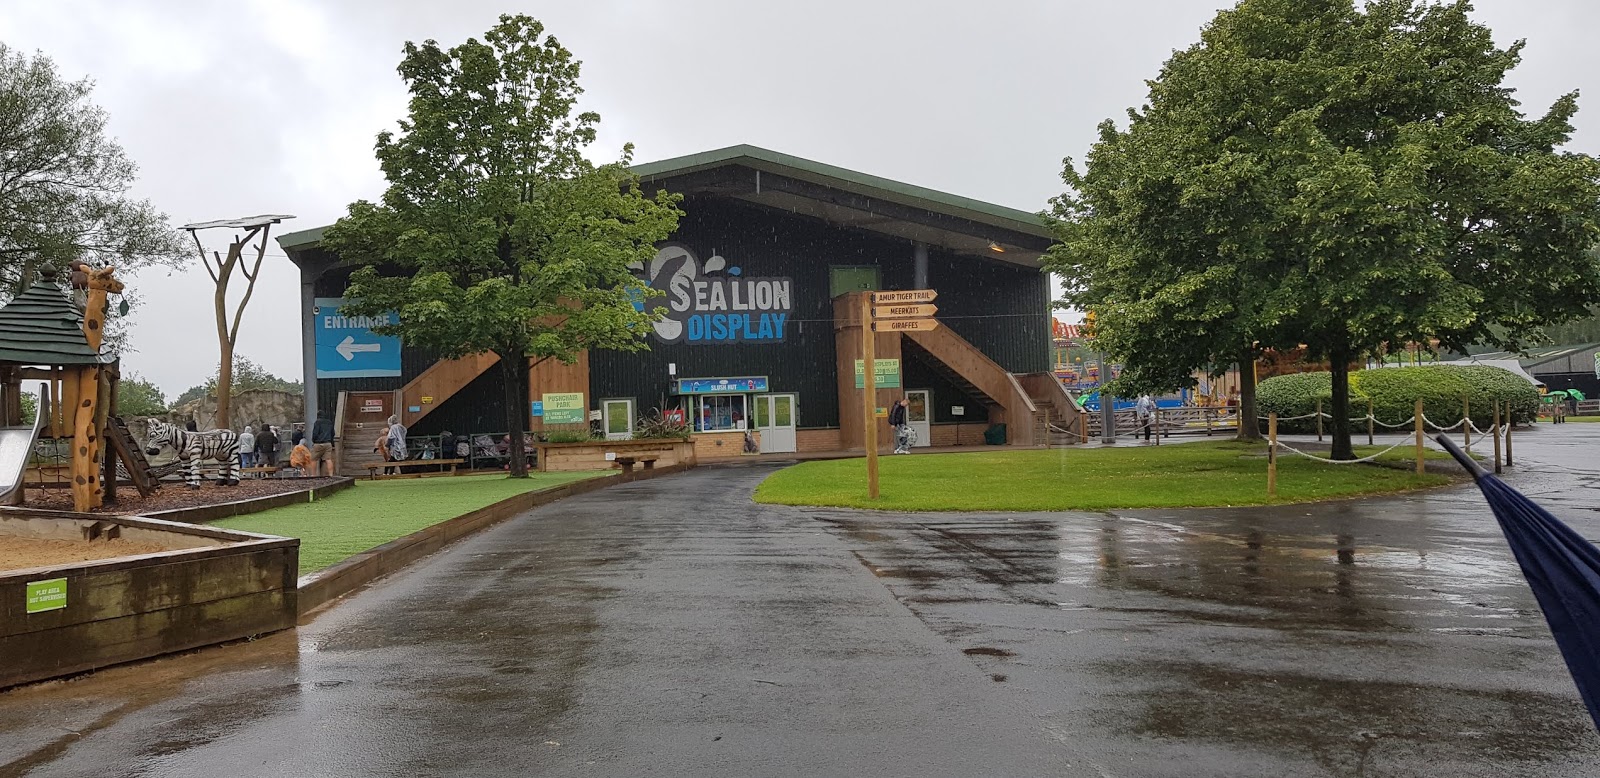 knowsley safari park stay over